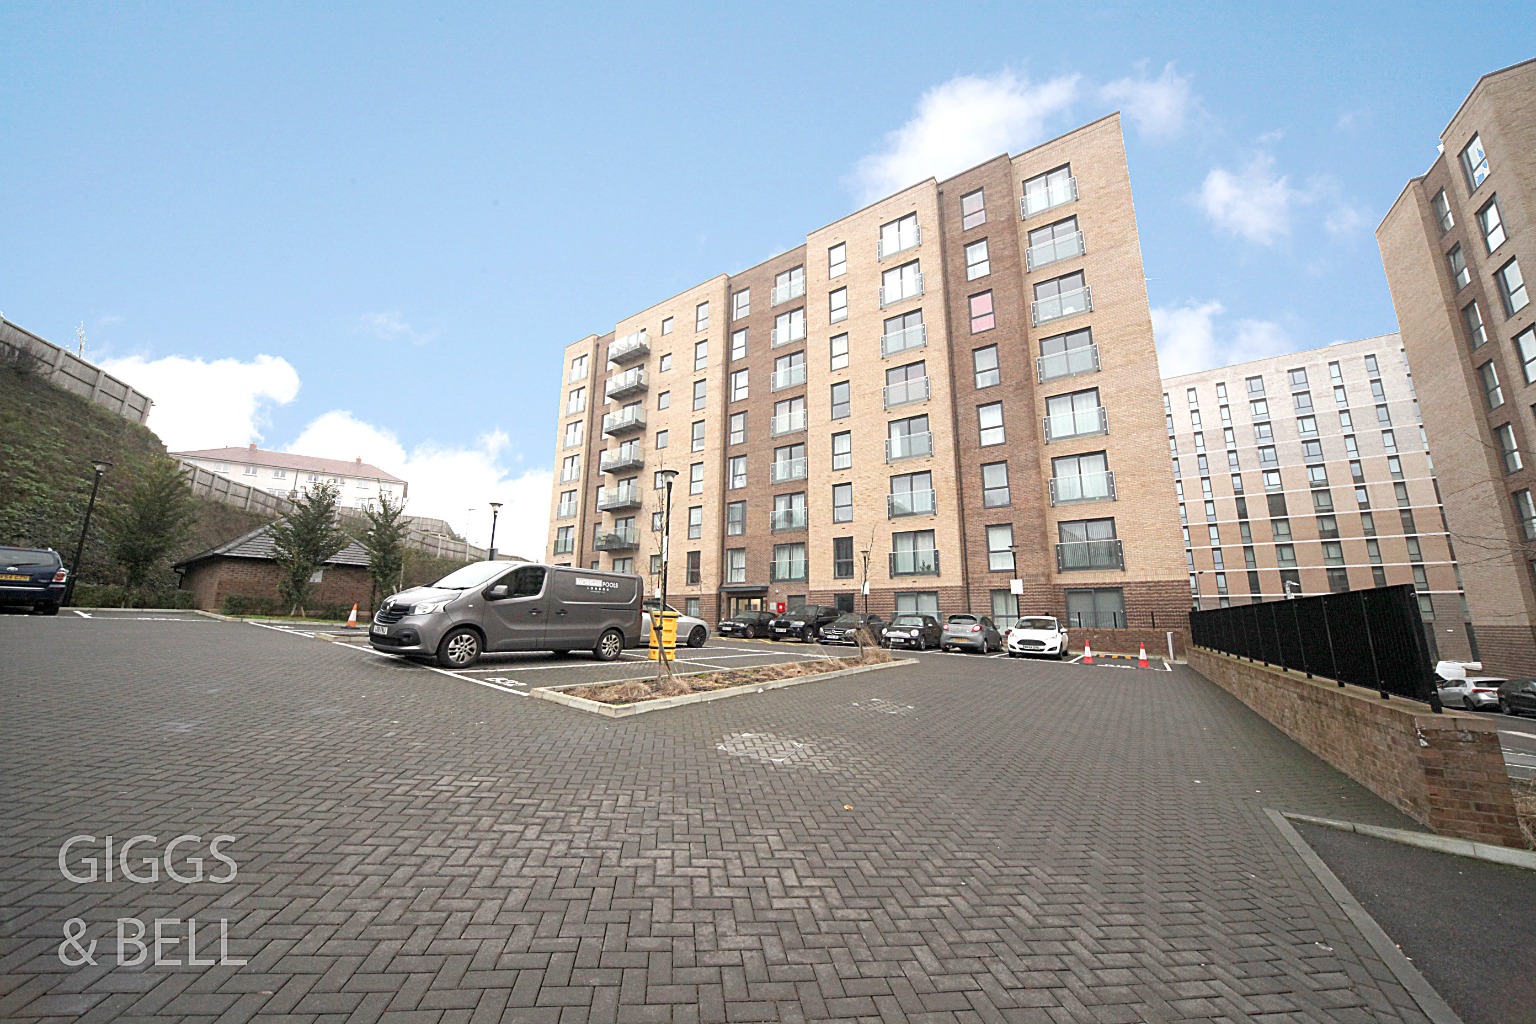 1 bed flat for sale, Luton, LU2 